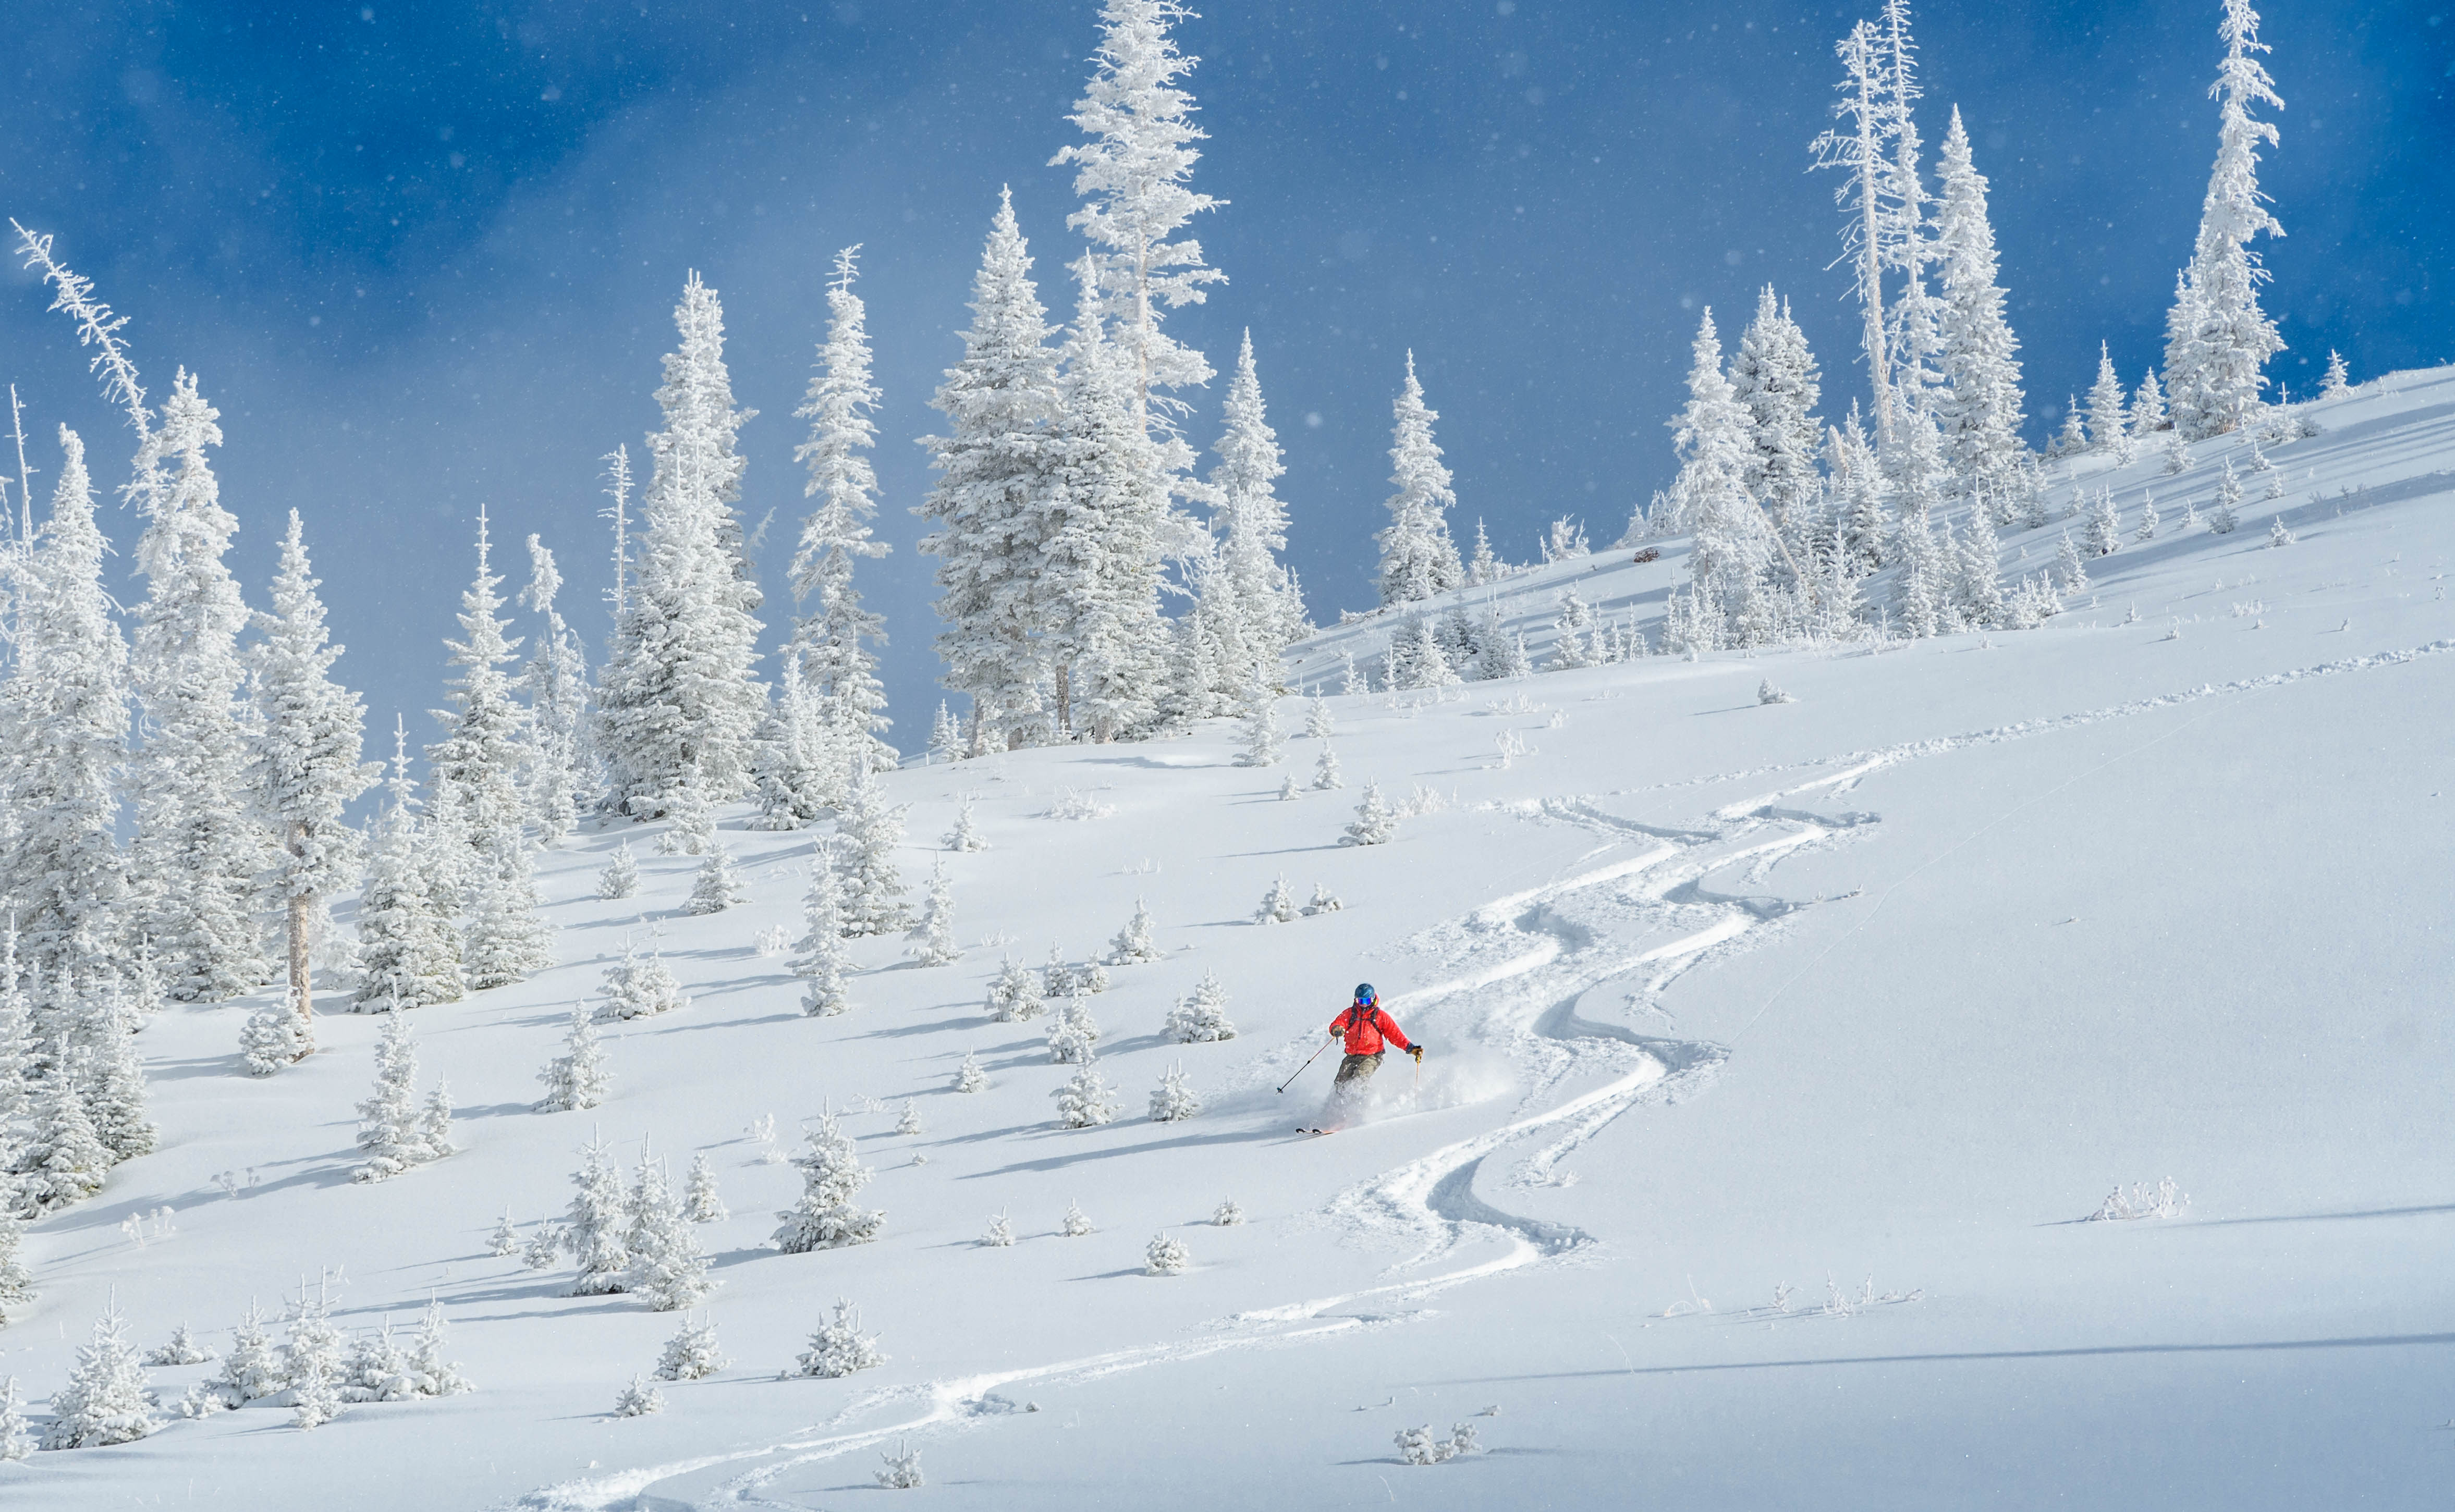 Brian Head Resort announces opening date, early season conditions